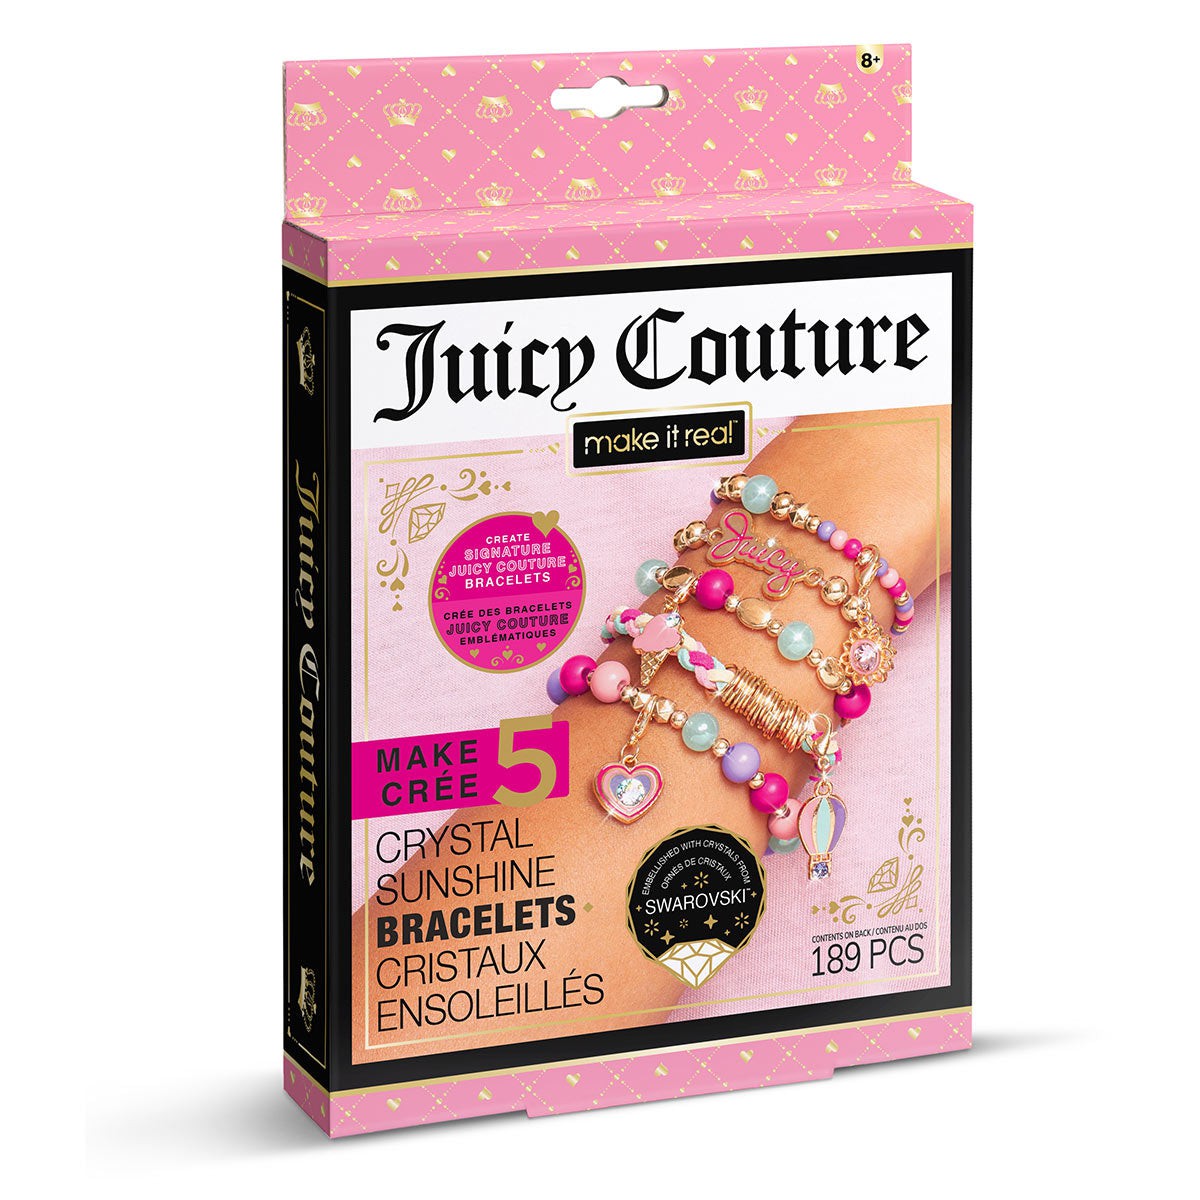 Juicy Couture Small Crystal Sunshine Bracelet Craft Kit